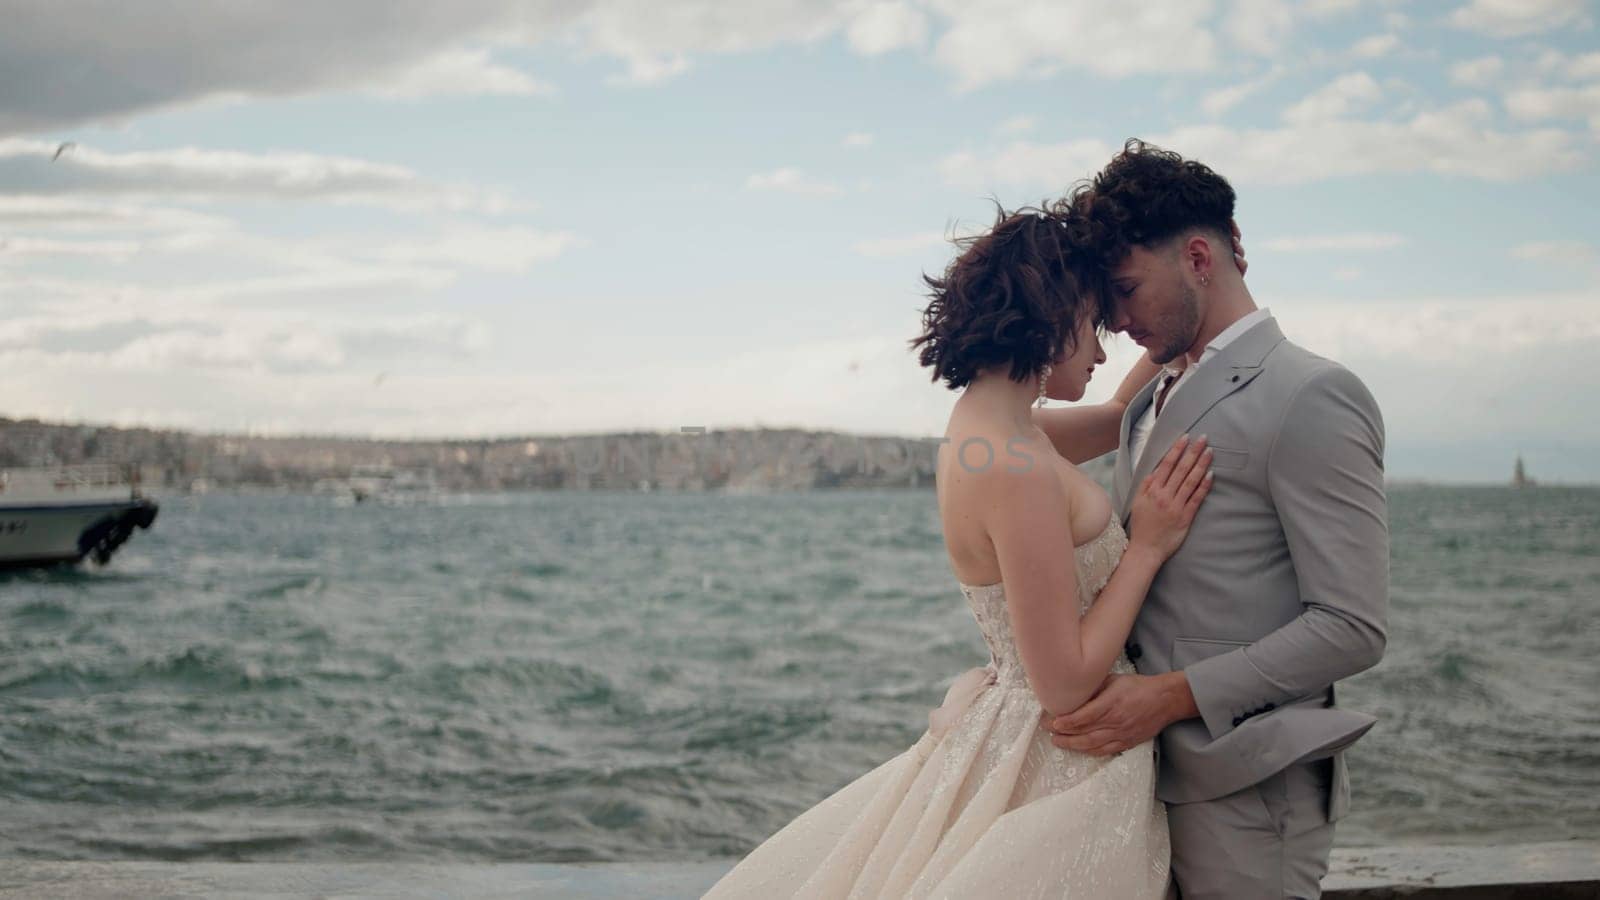 Cute newlywed couple embracing at the beach on their wedding day. Action. Bride and groom in love by the sea standing on pier